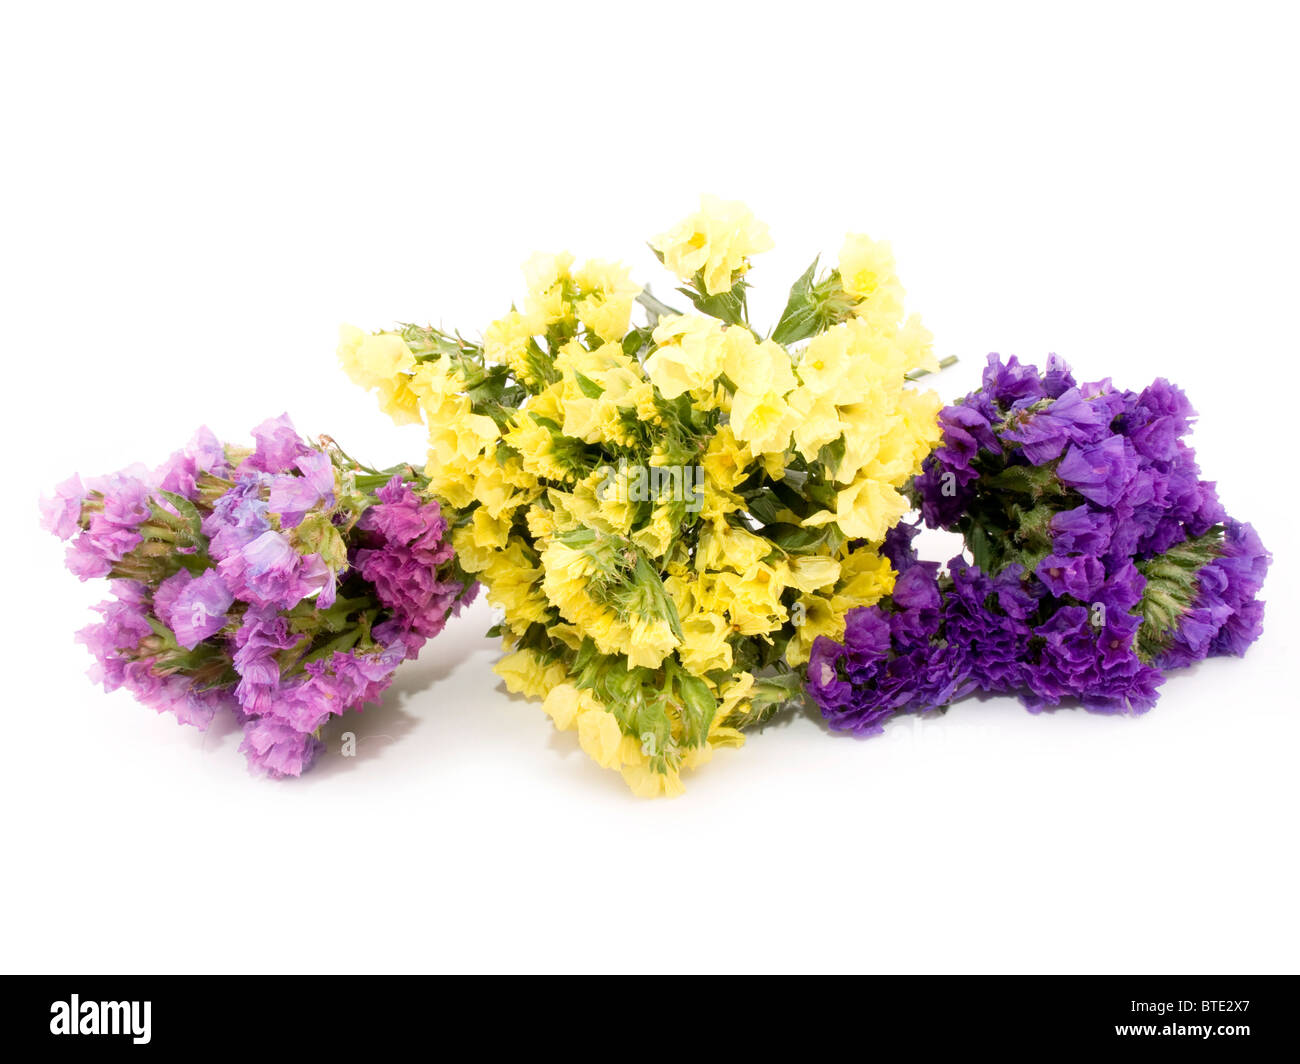 Bouquet of beautiful statice flowers on white background. Stock Photo